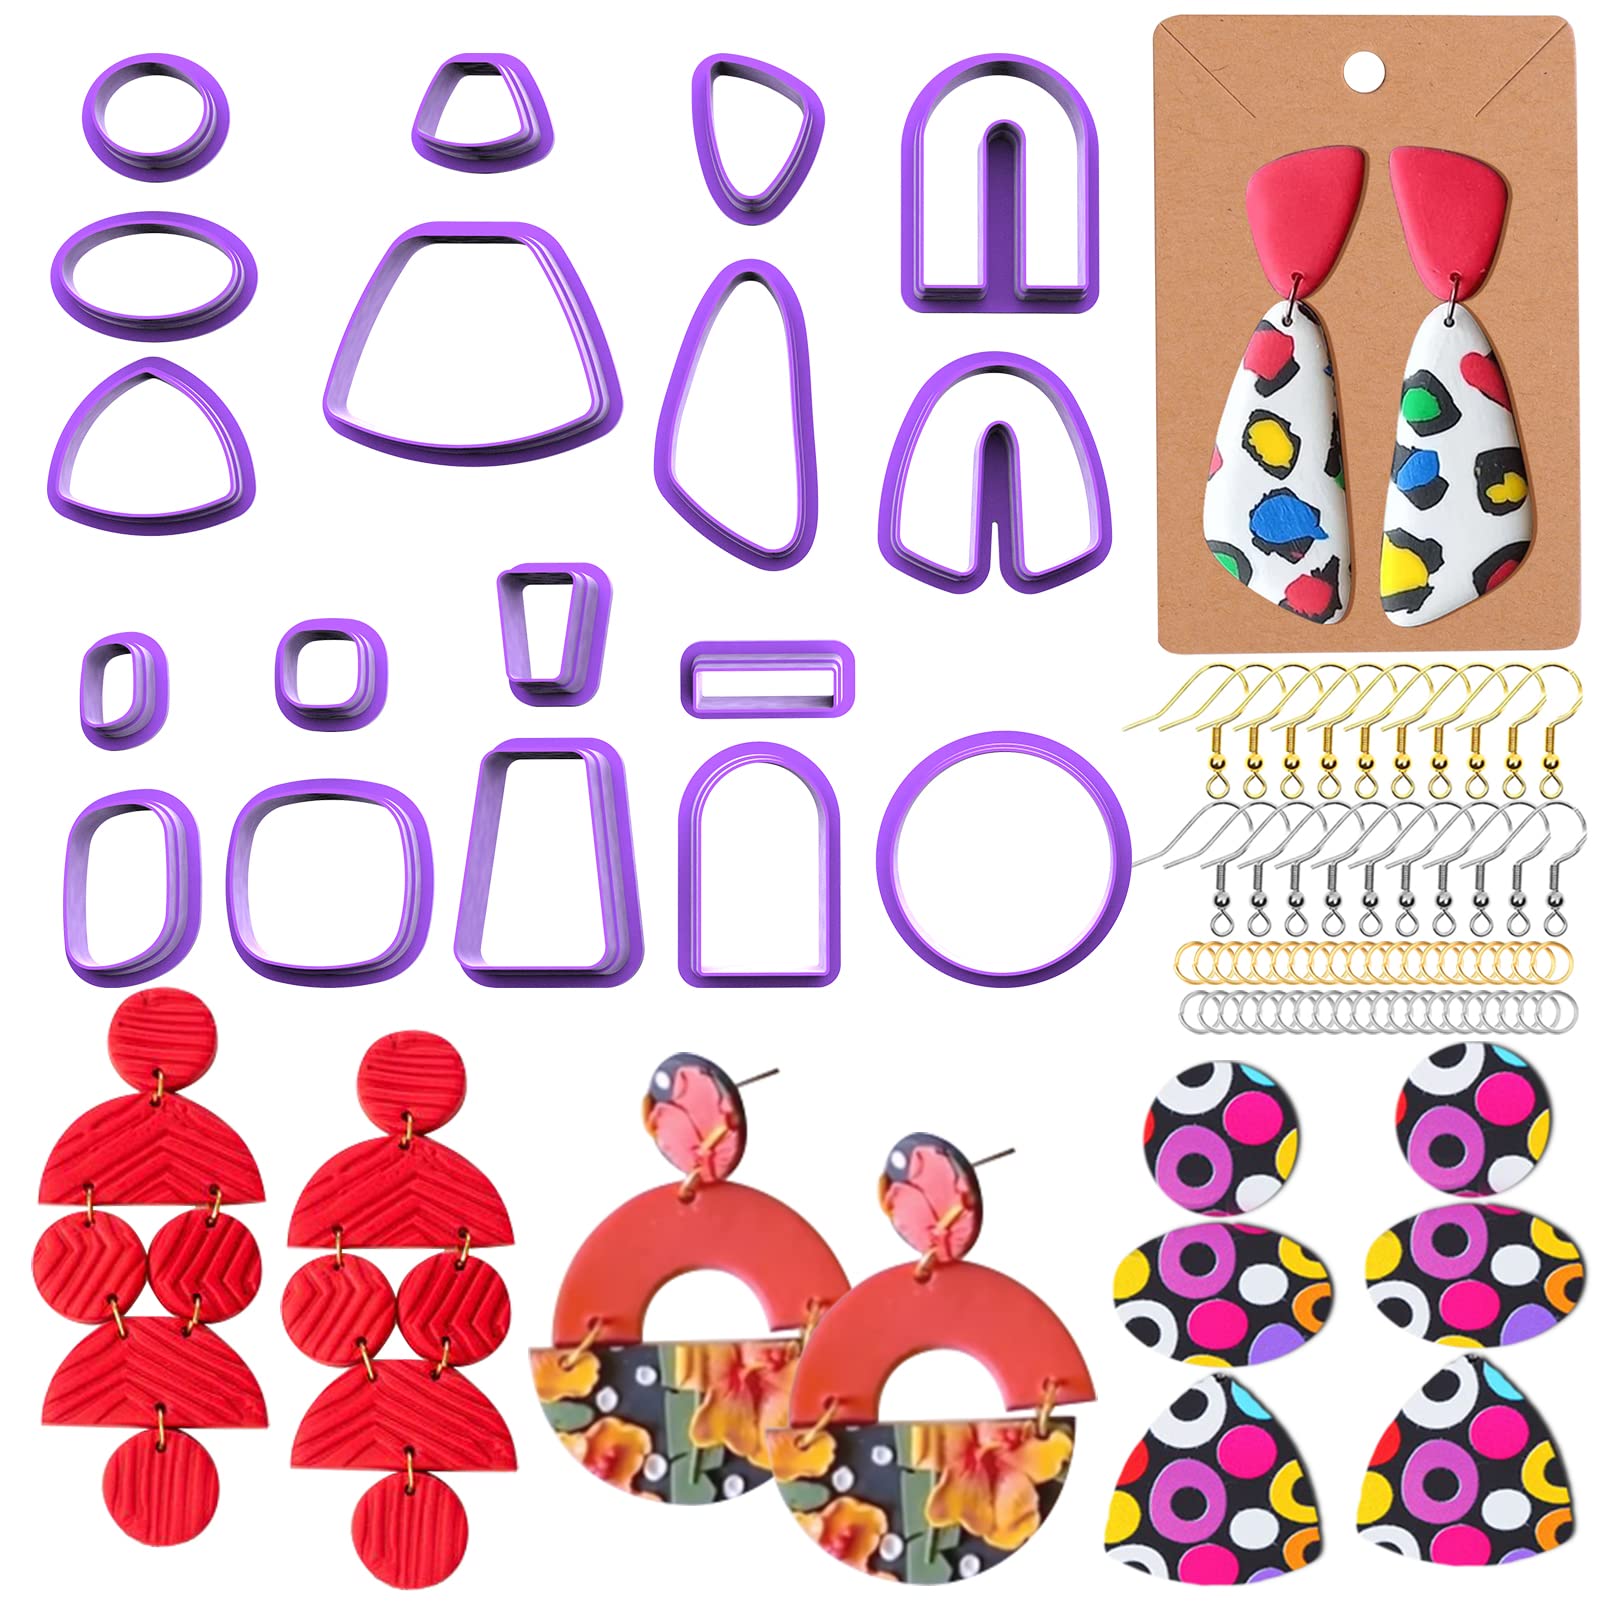 BABORUI 118Pcs Polymer Clay Cutters kit Set of 18 Clay Cutters